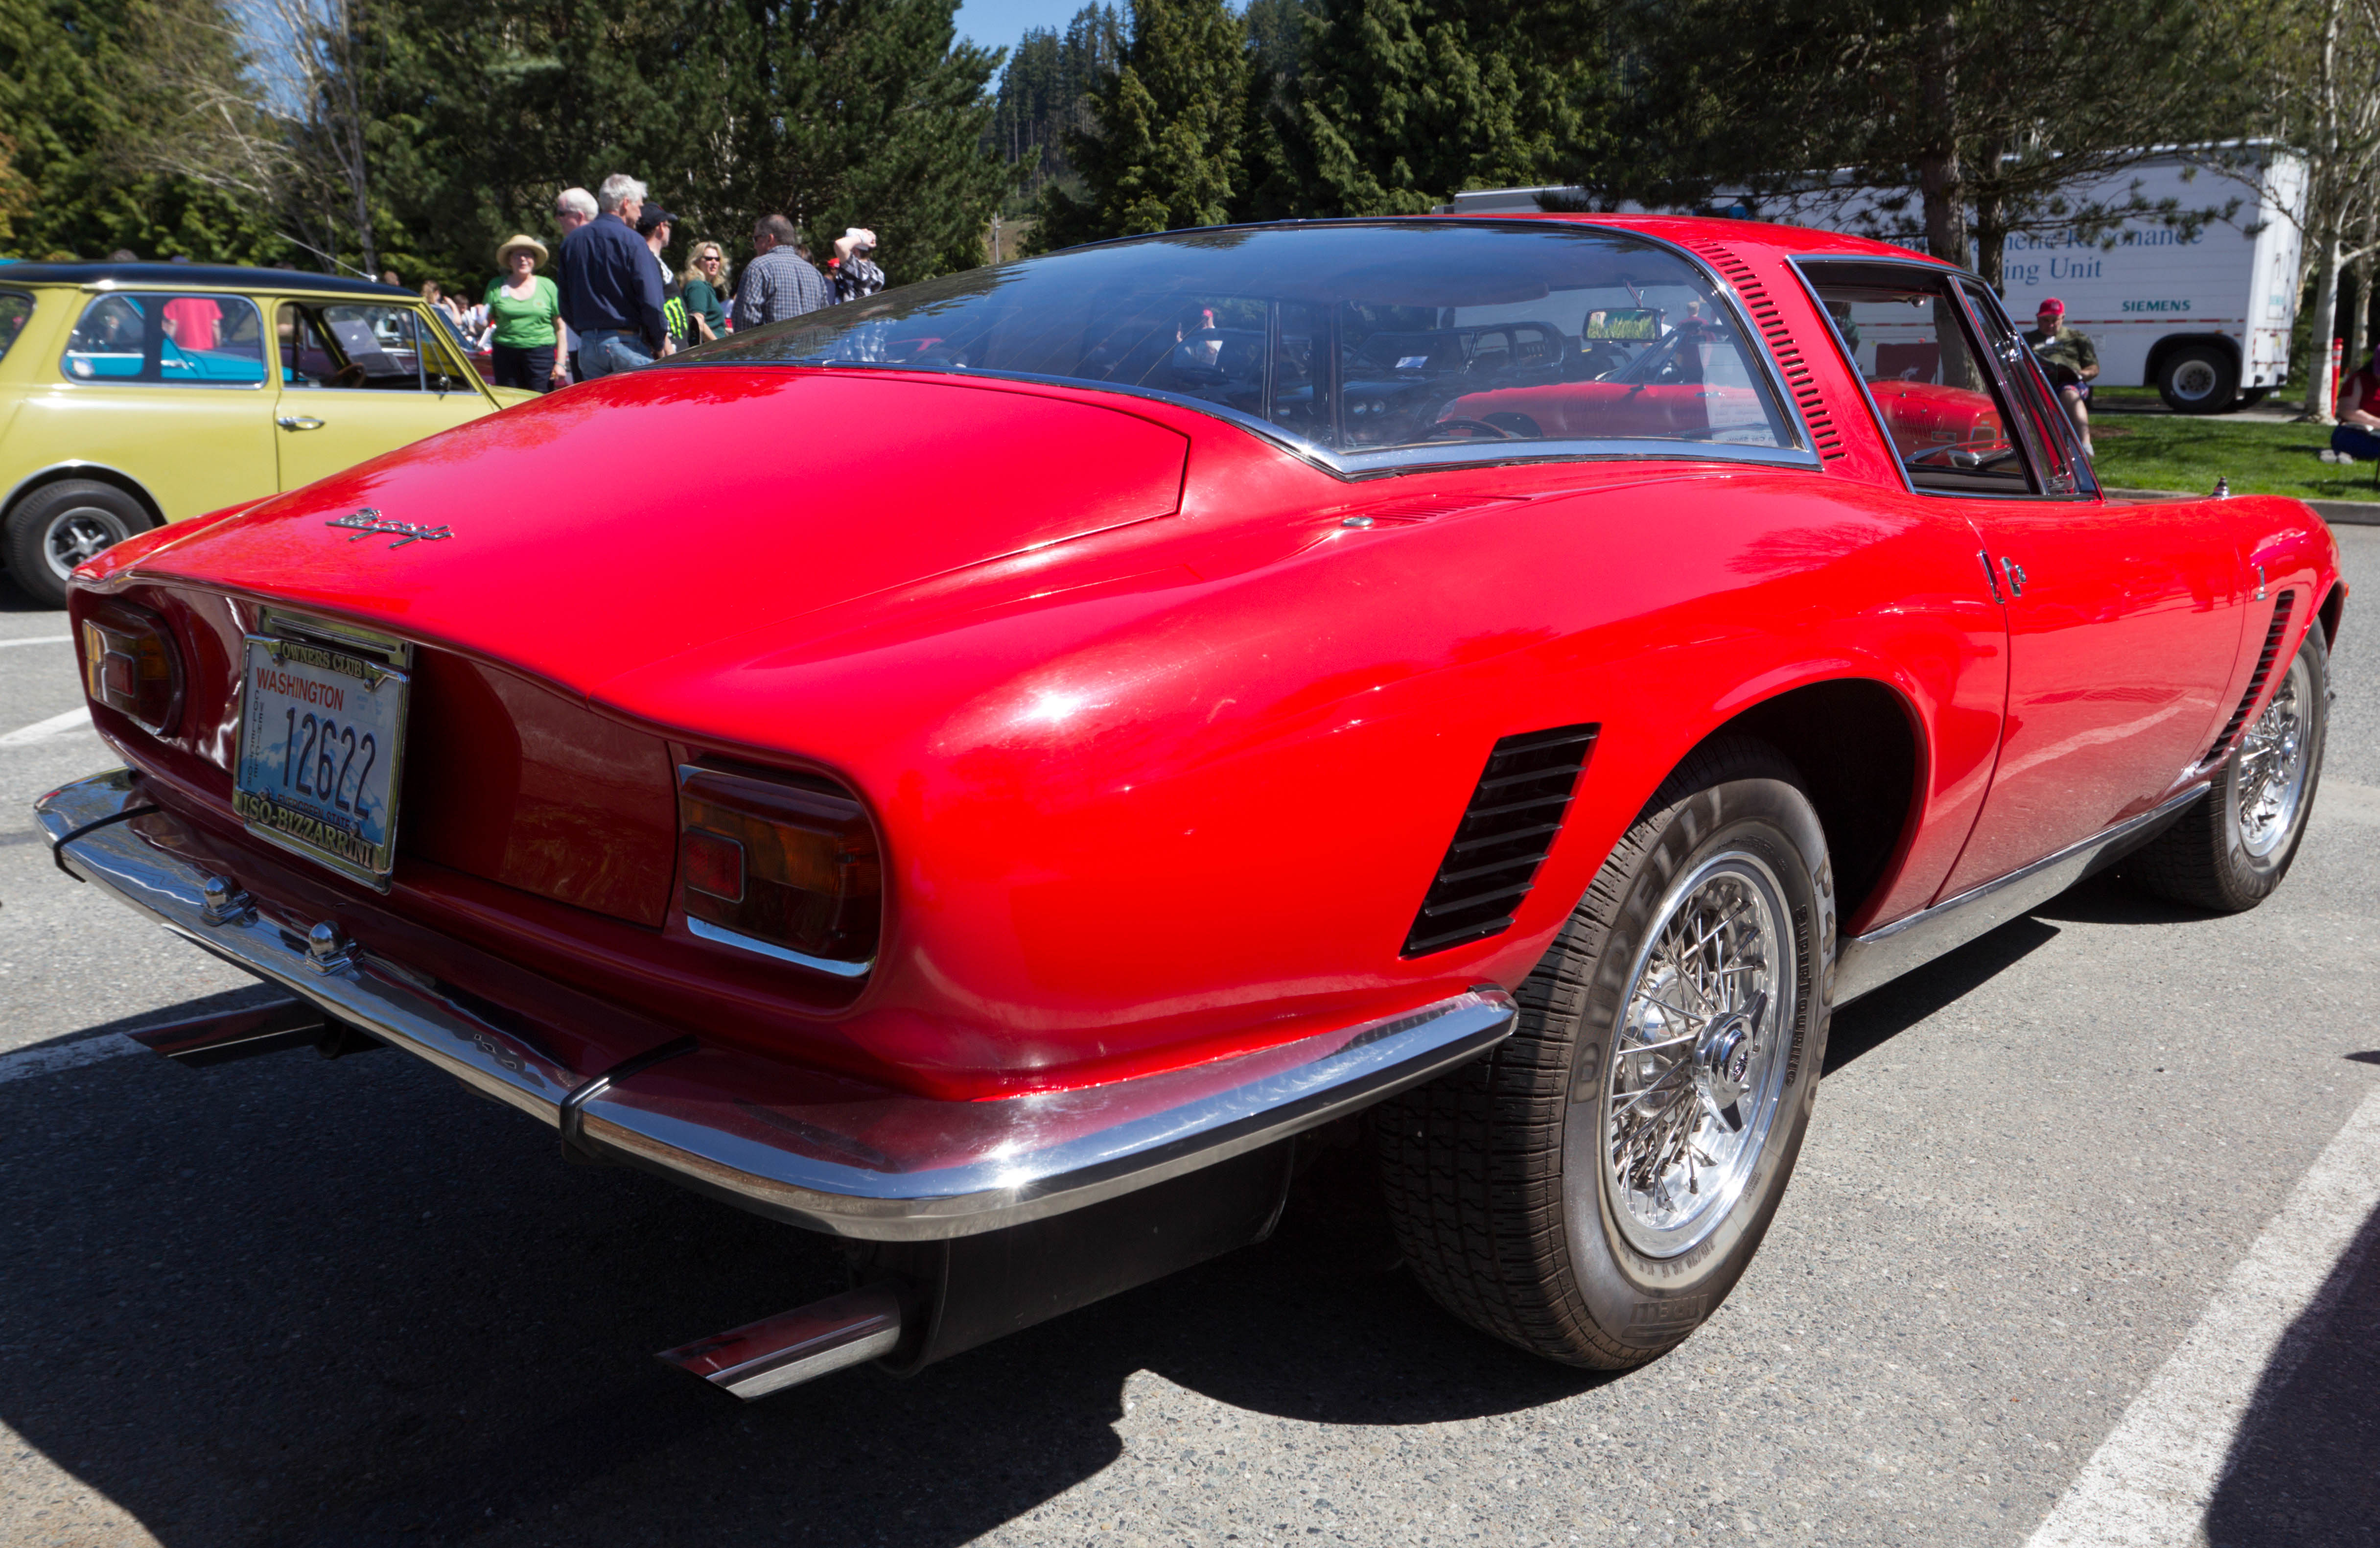 Steve Nylin's 1967 Iso Grifo GL-350 Coupe | Flickr - Photo Sharing!